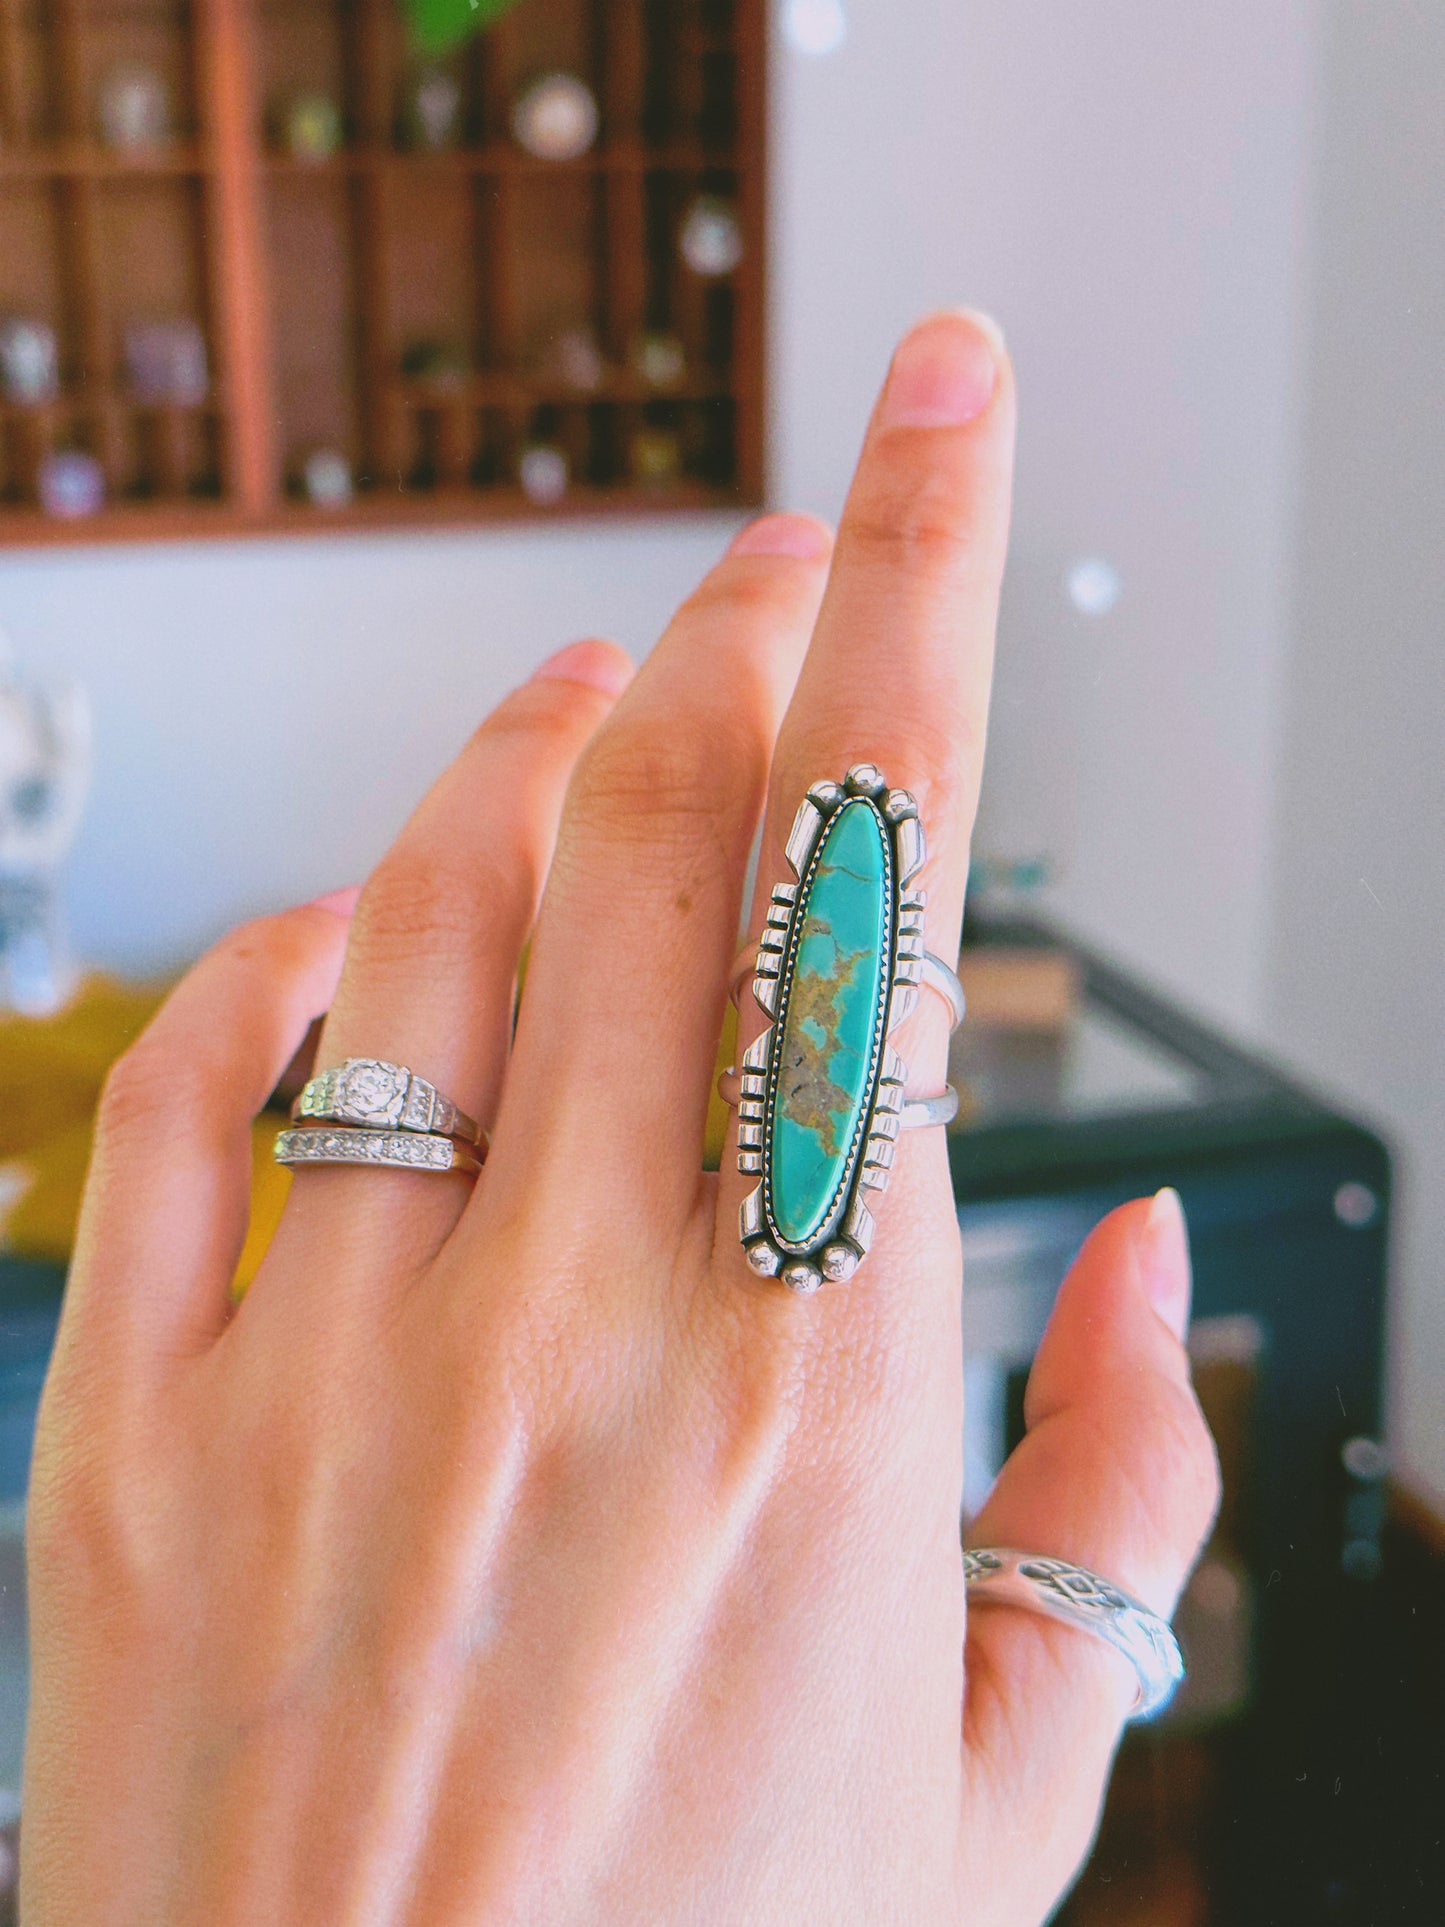 Saw cut Ring with Mina Maria turquoise SIZE 7